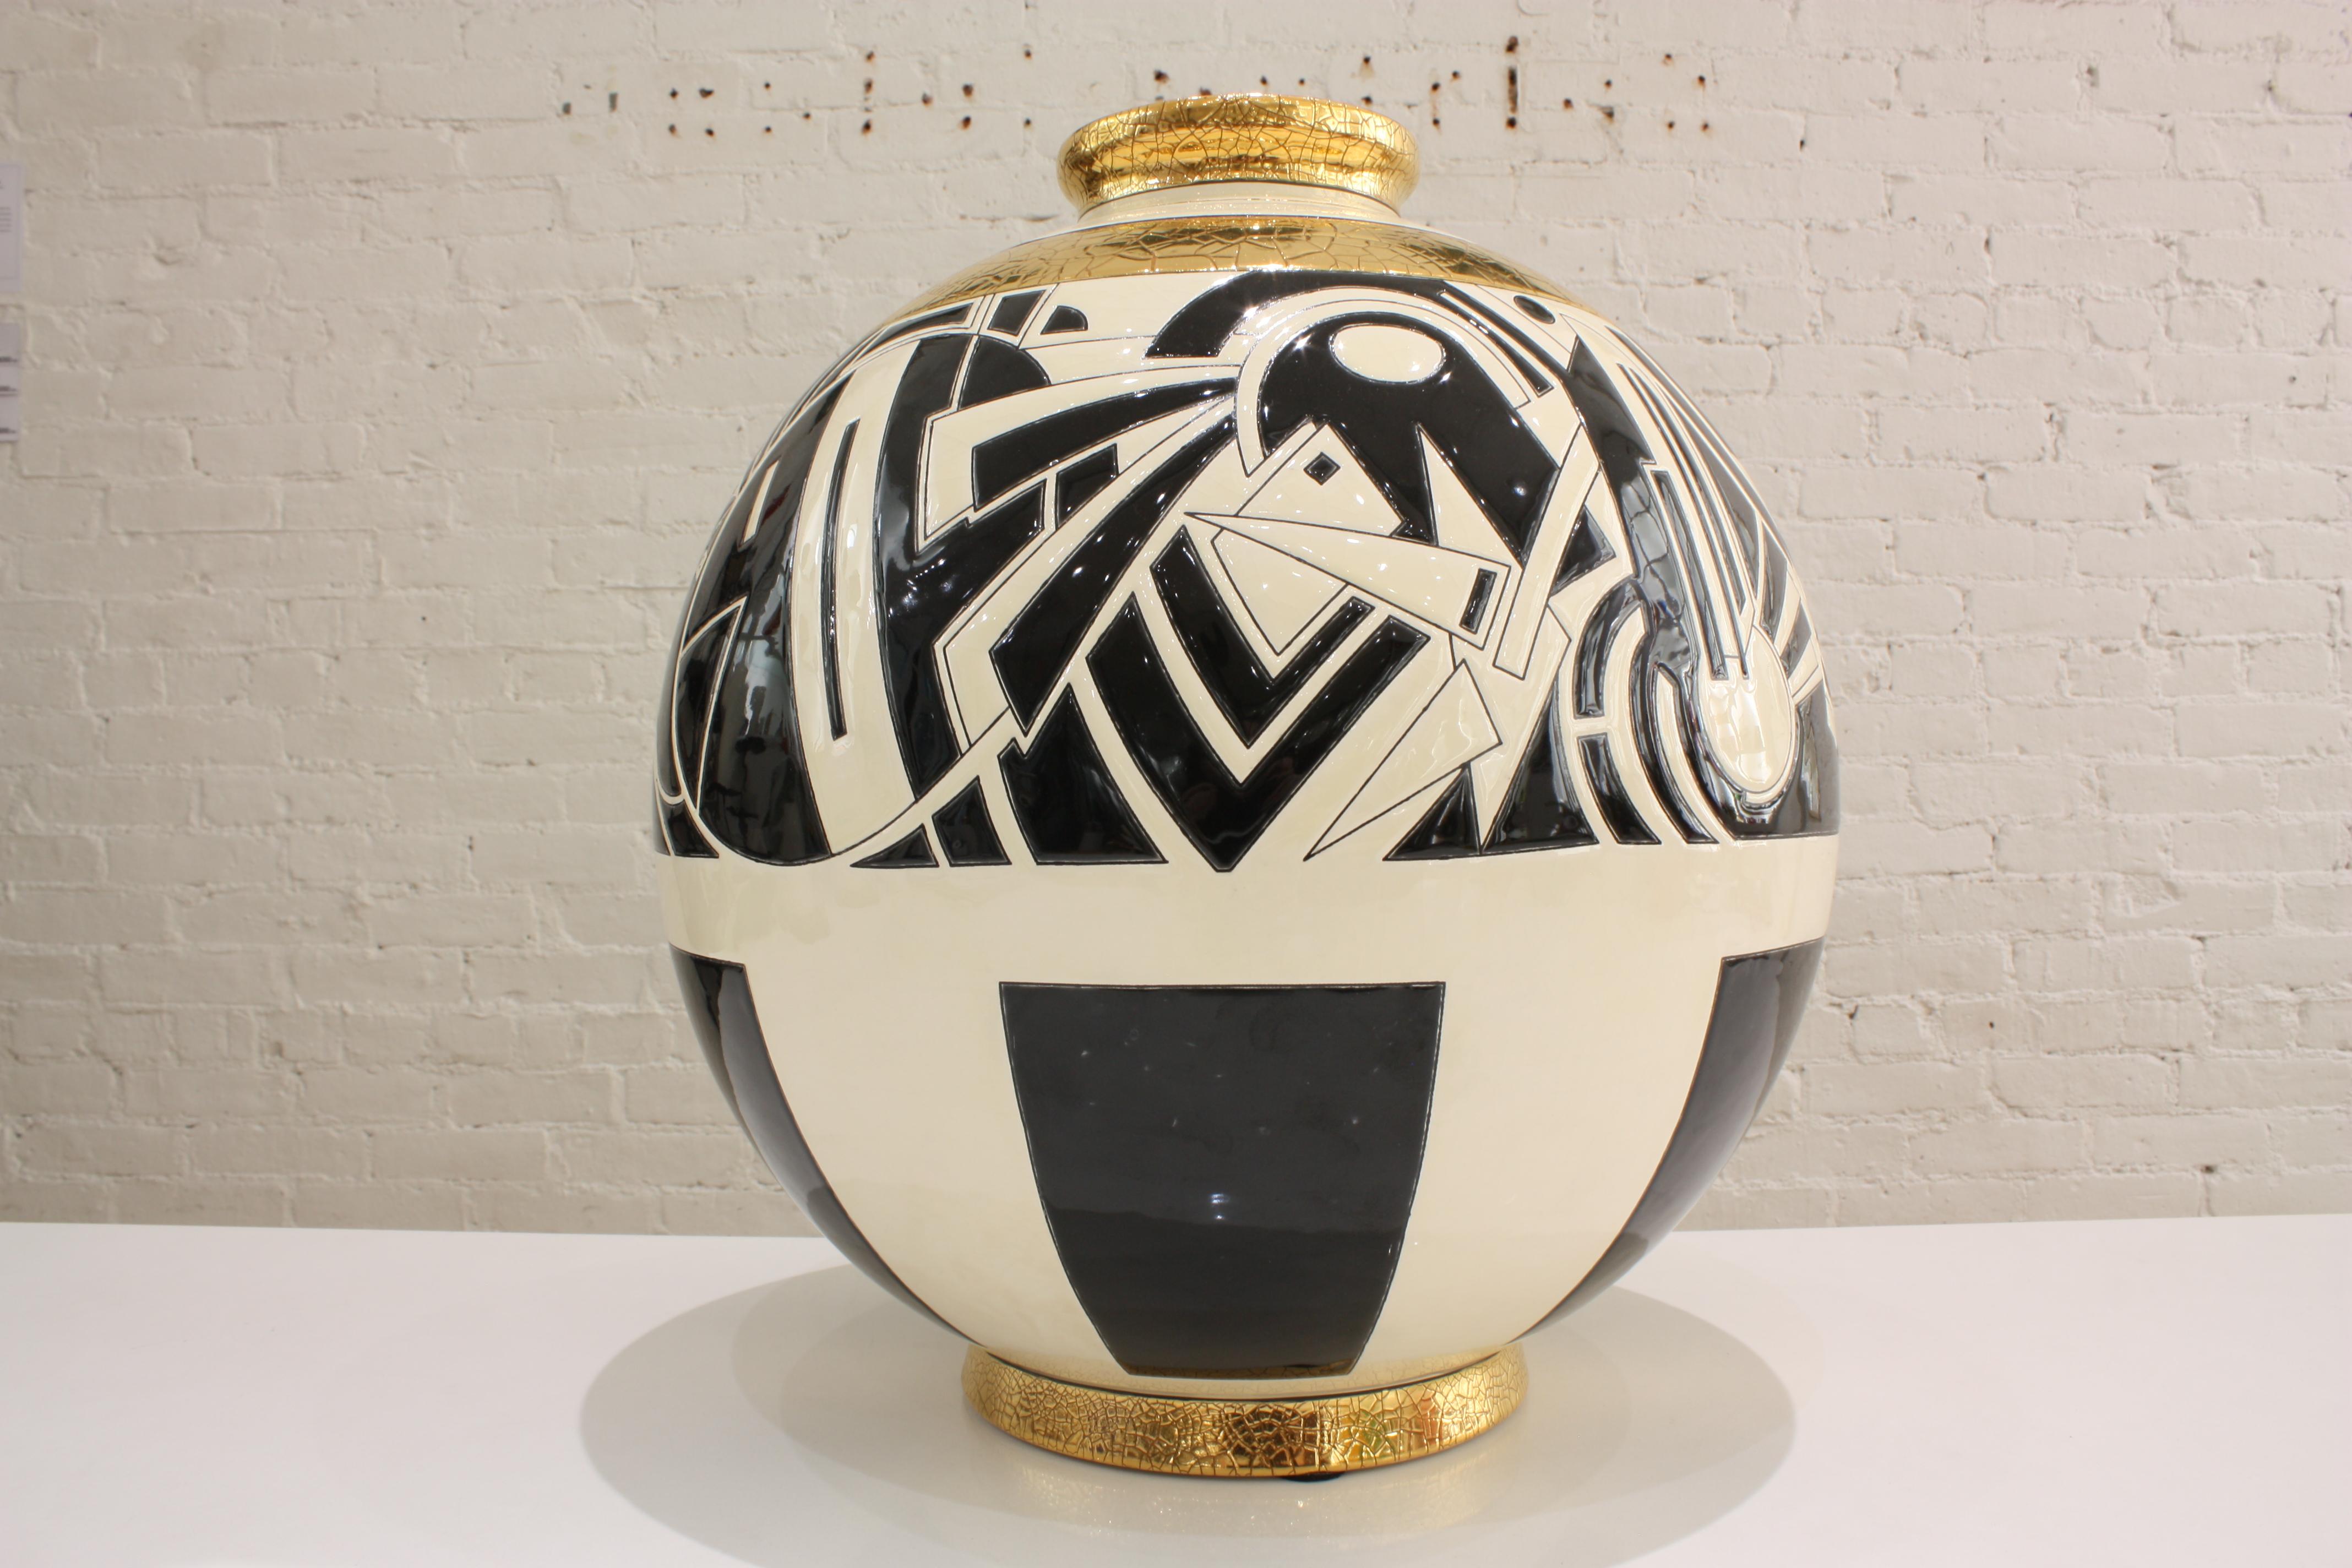 Superb round vase in limited edition in Art Deco style. The artist Nicolas Blandin was commissioned by Les Emaux de Longwy to create this graphic design for their world famous Boule vases. Black and ivory tones highlighted by crackled gold leaf give